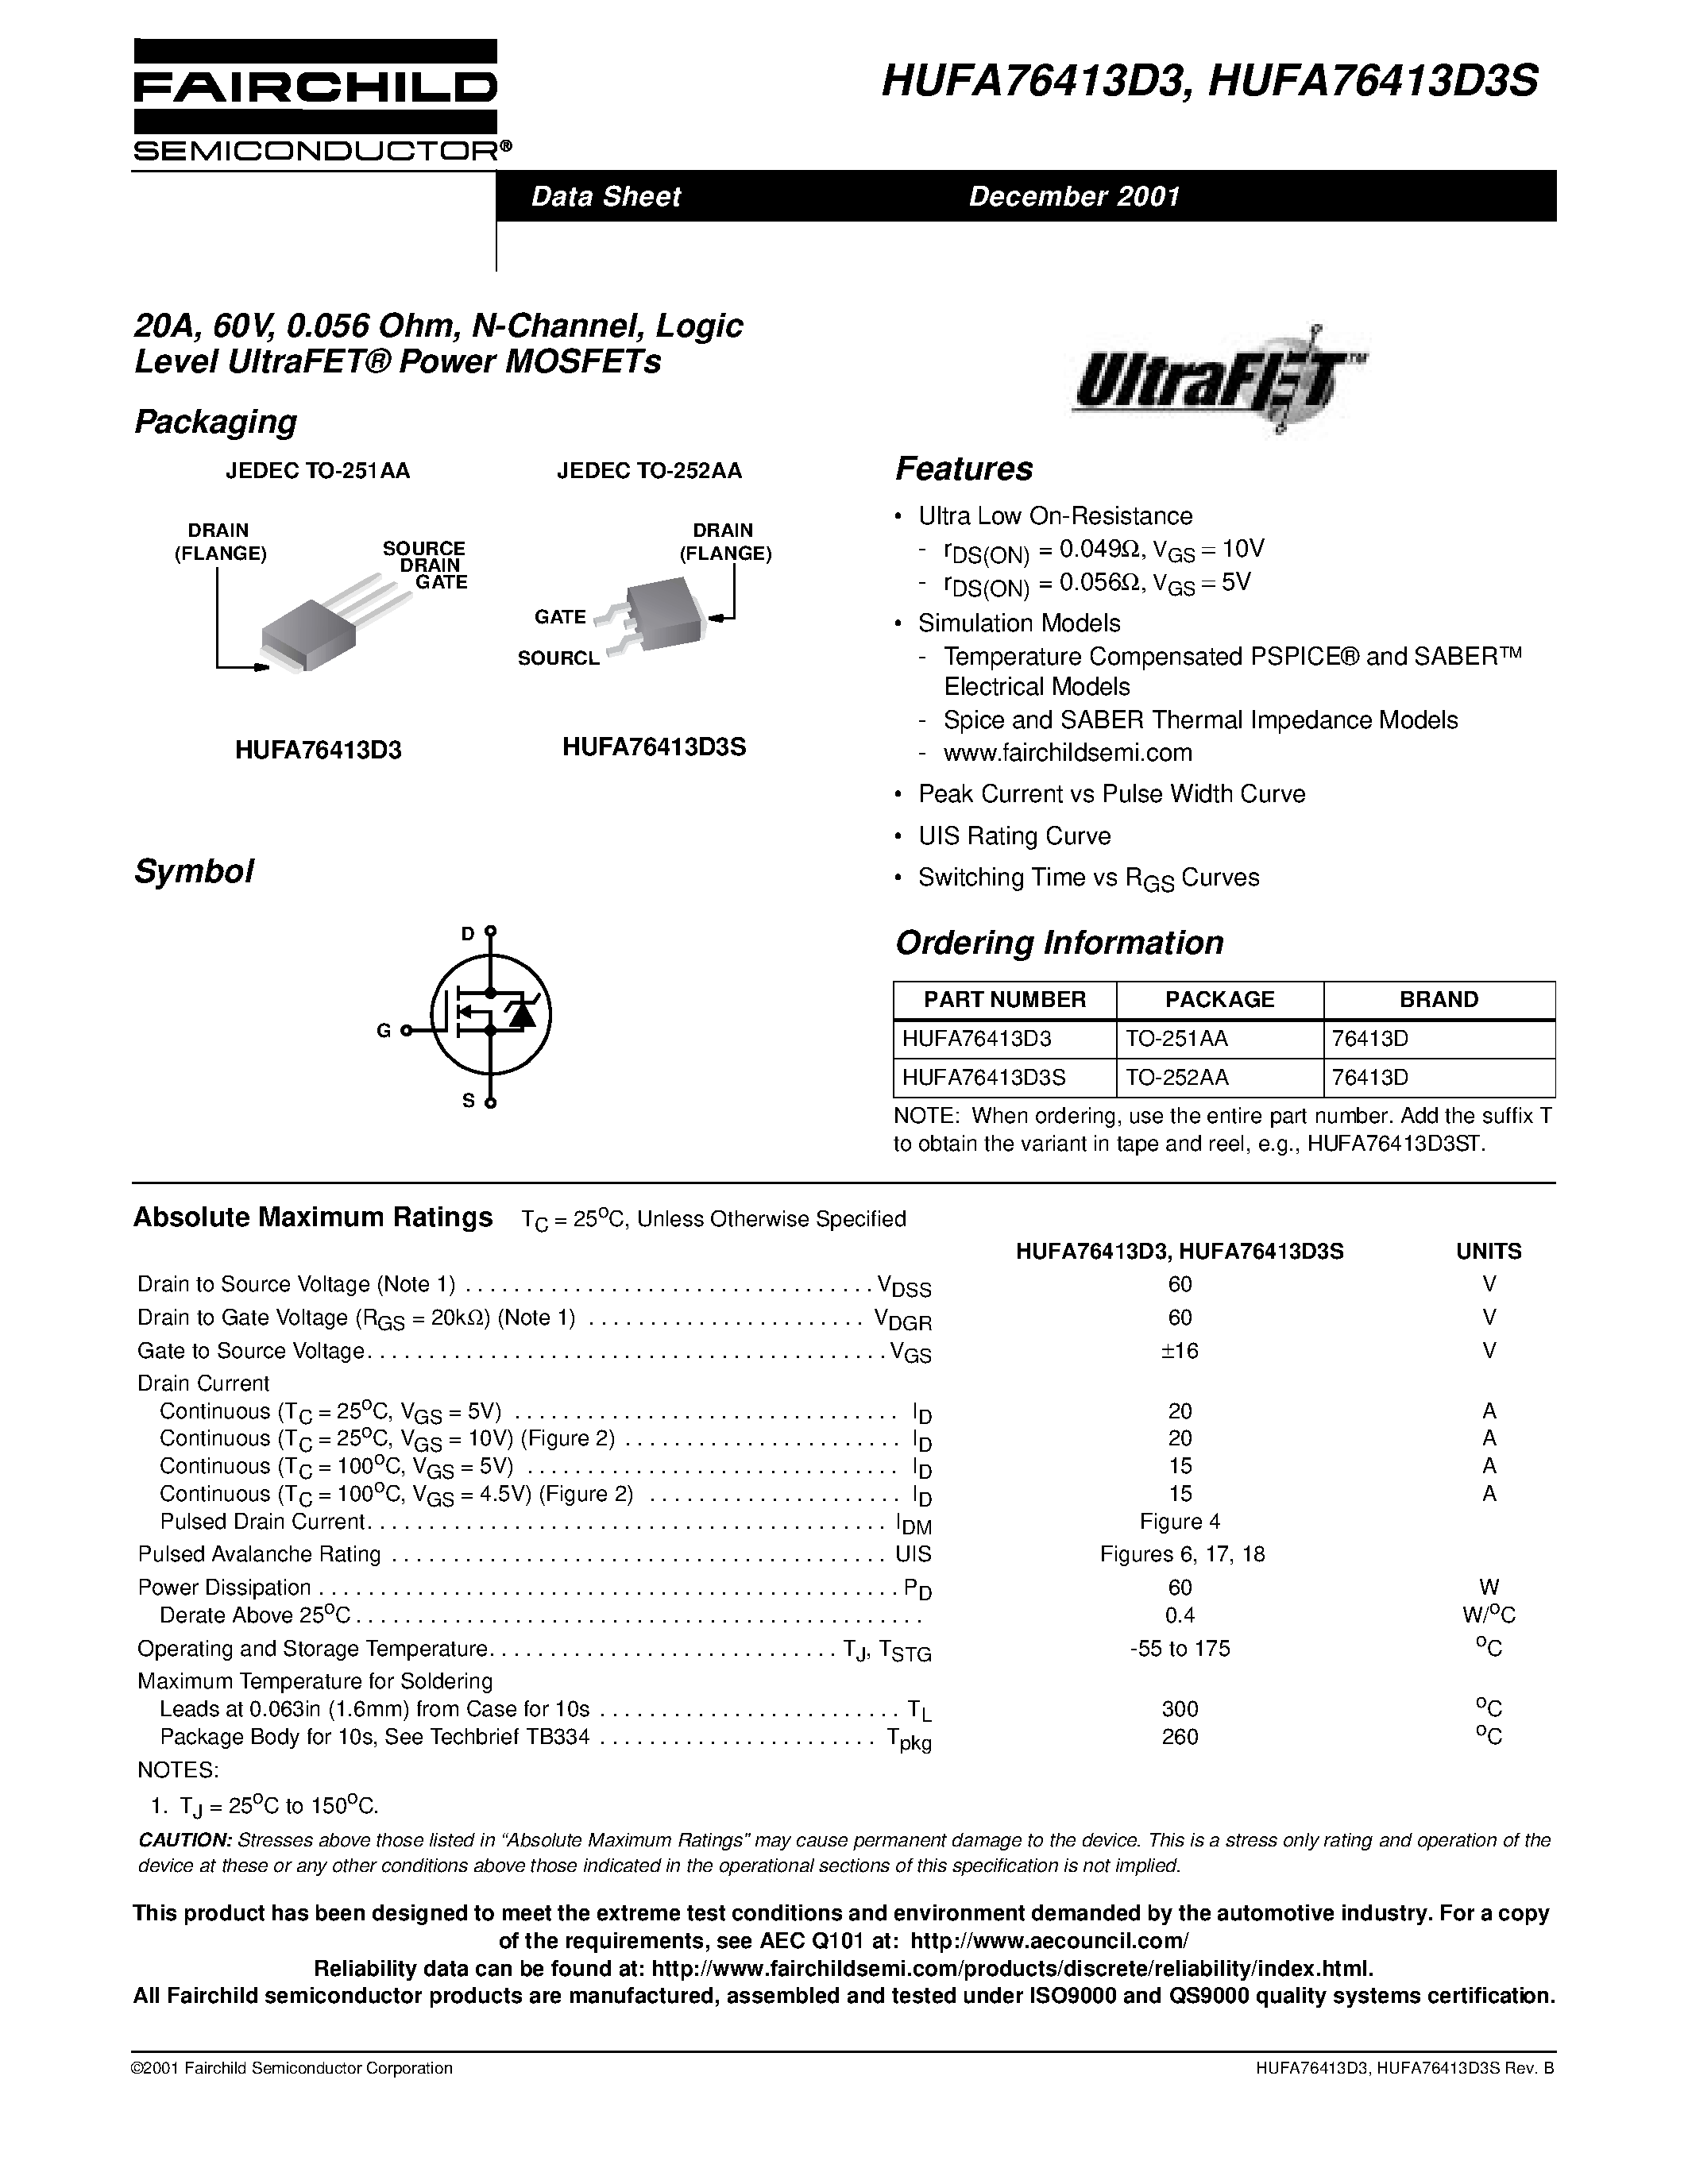 Datasheet HUFA76413D3 - 20A/ 60V/ 0.056 Ohm/ N-Channel/ Logic Level UltraFET Power MOSFETs page 1